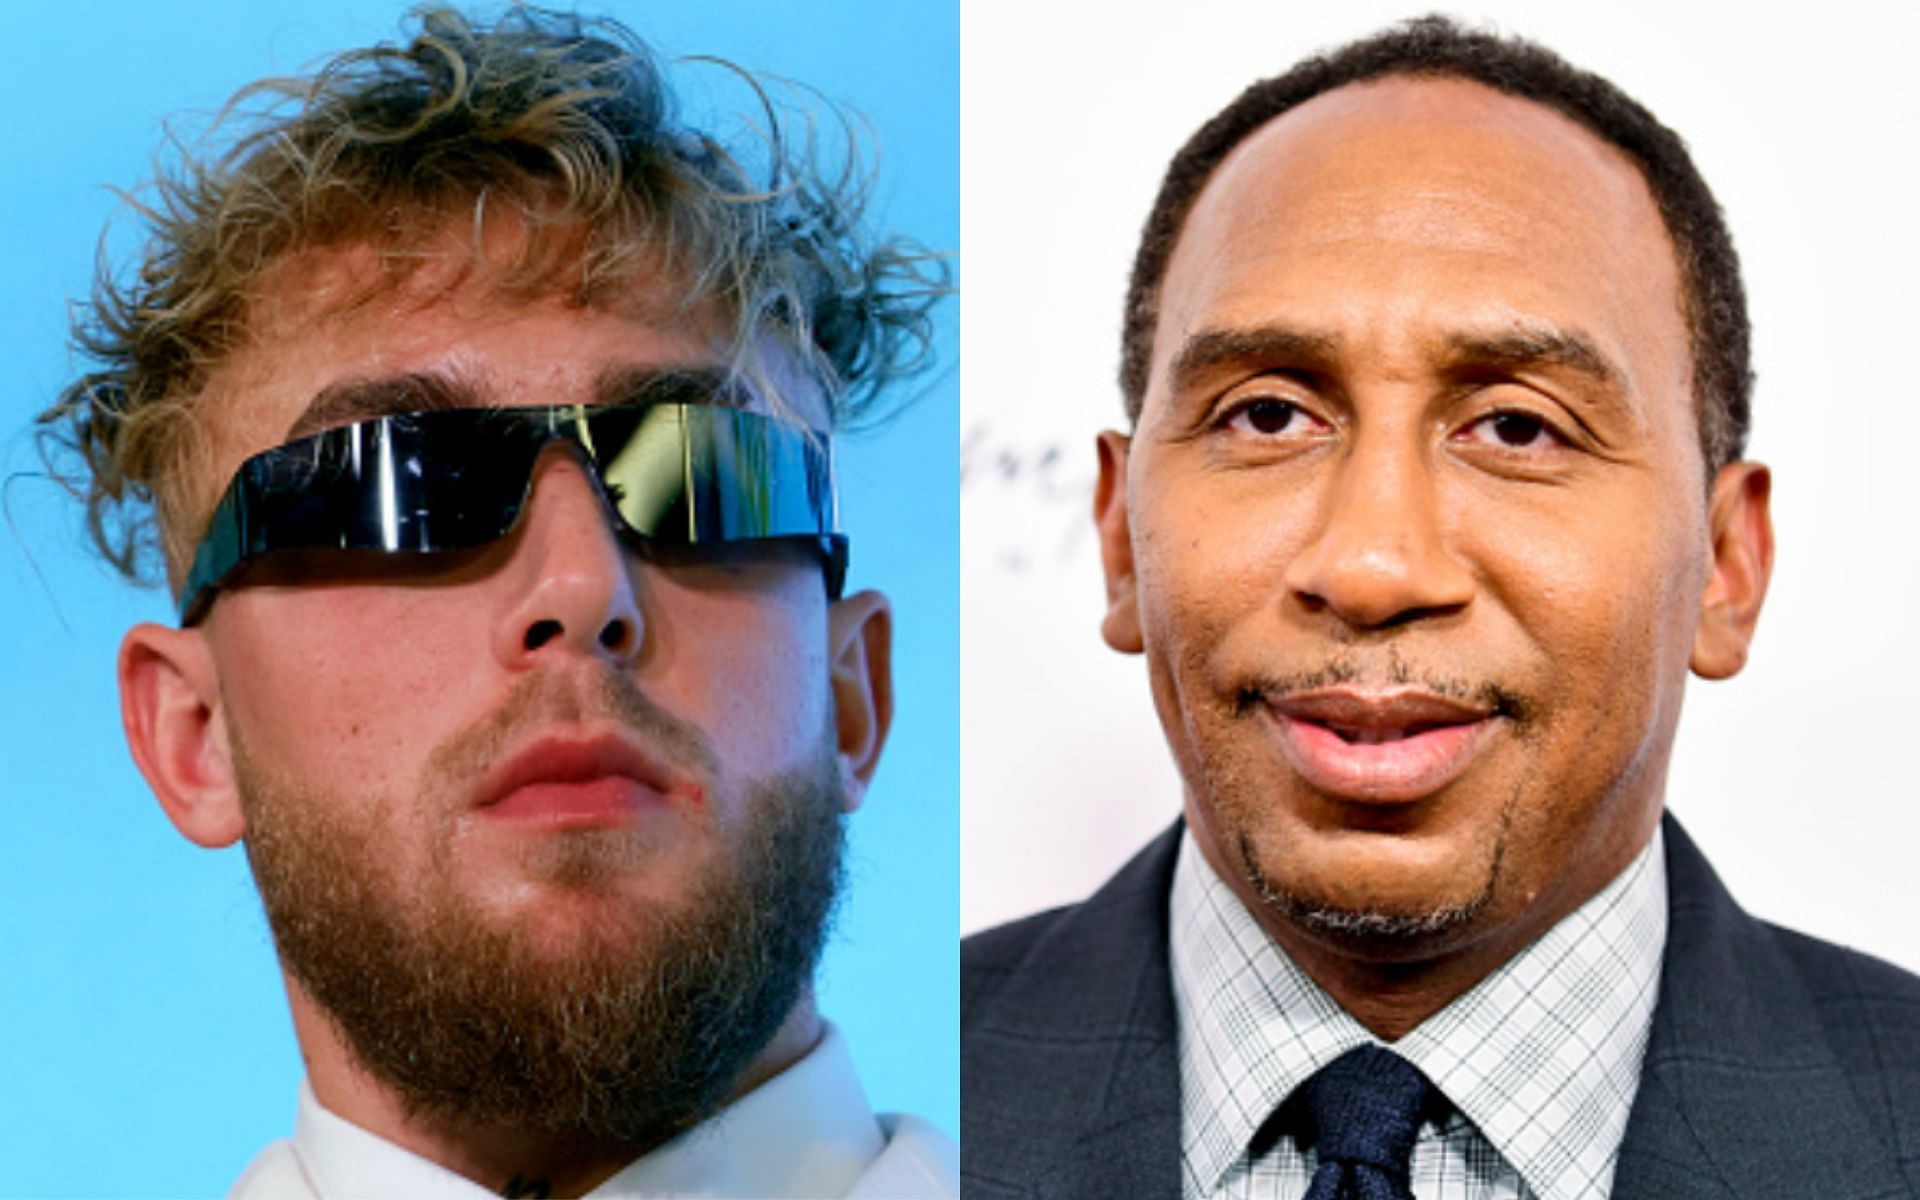 Jake Paul (left); Stephen A. Smith (right)